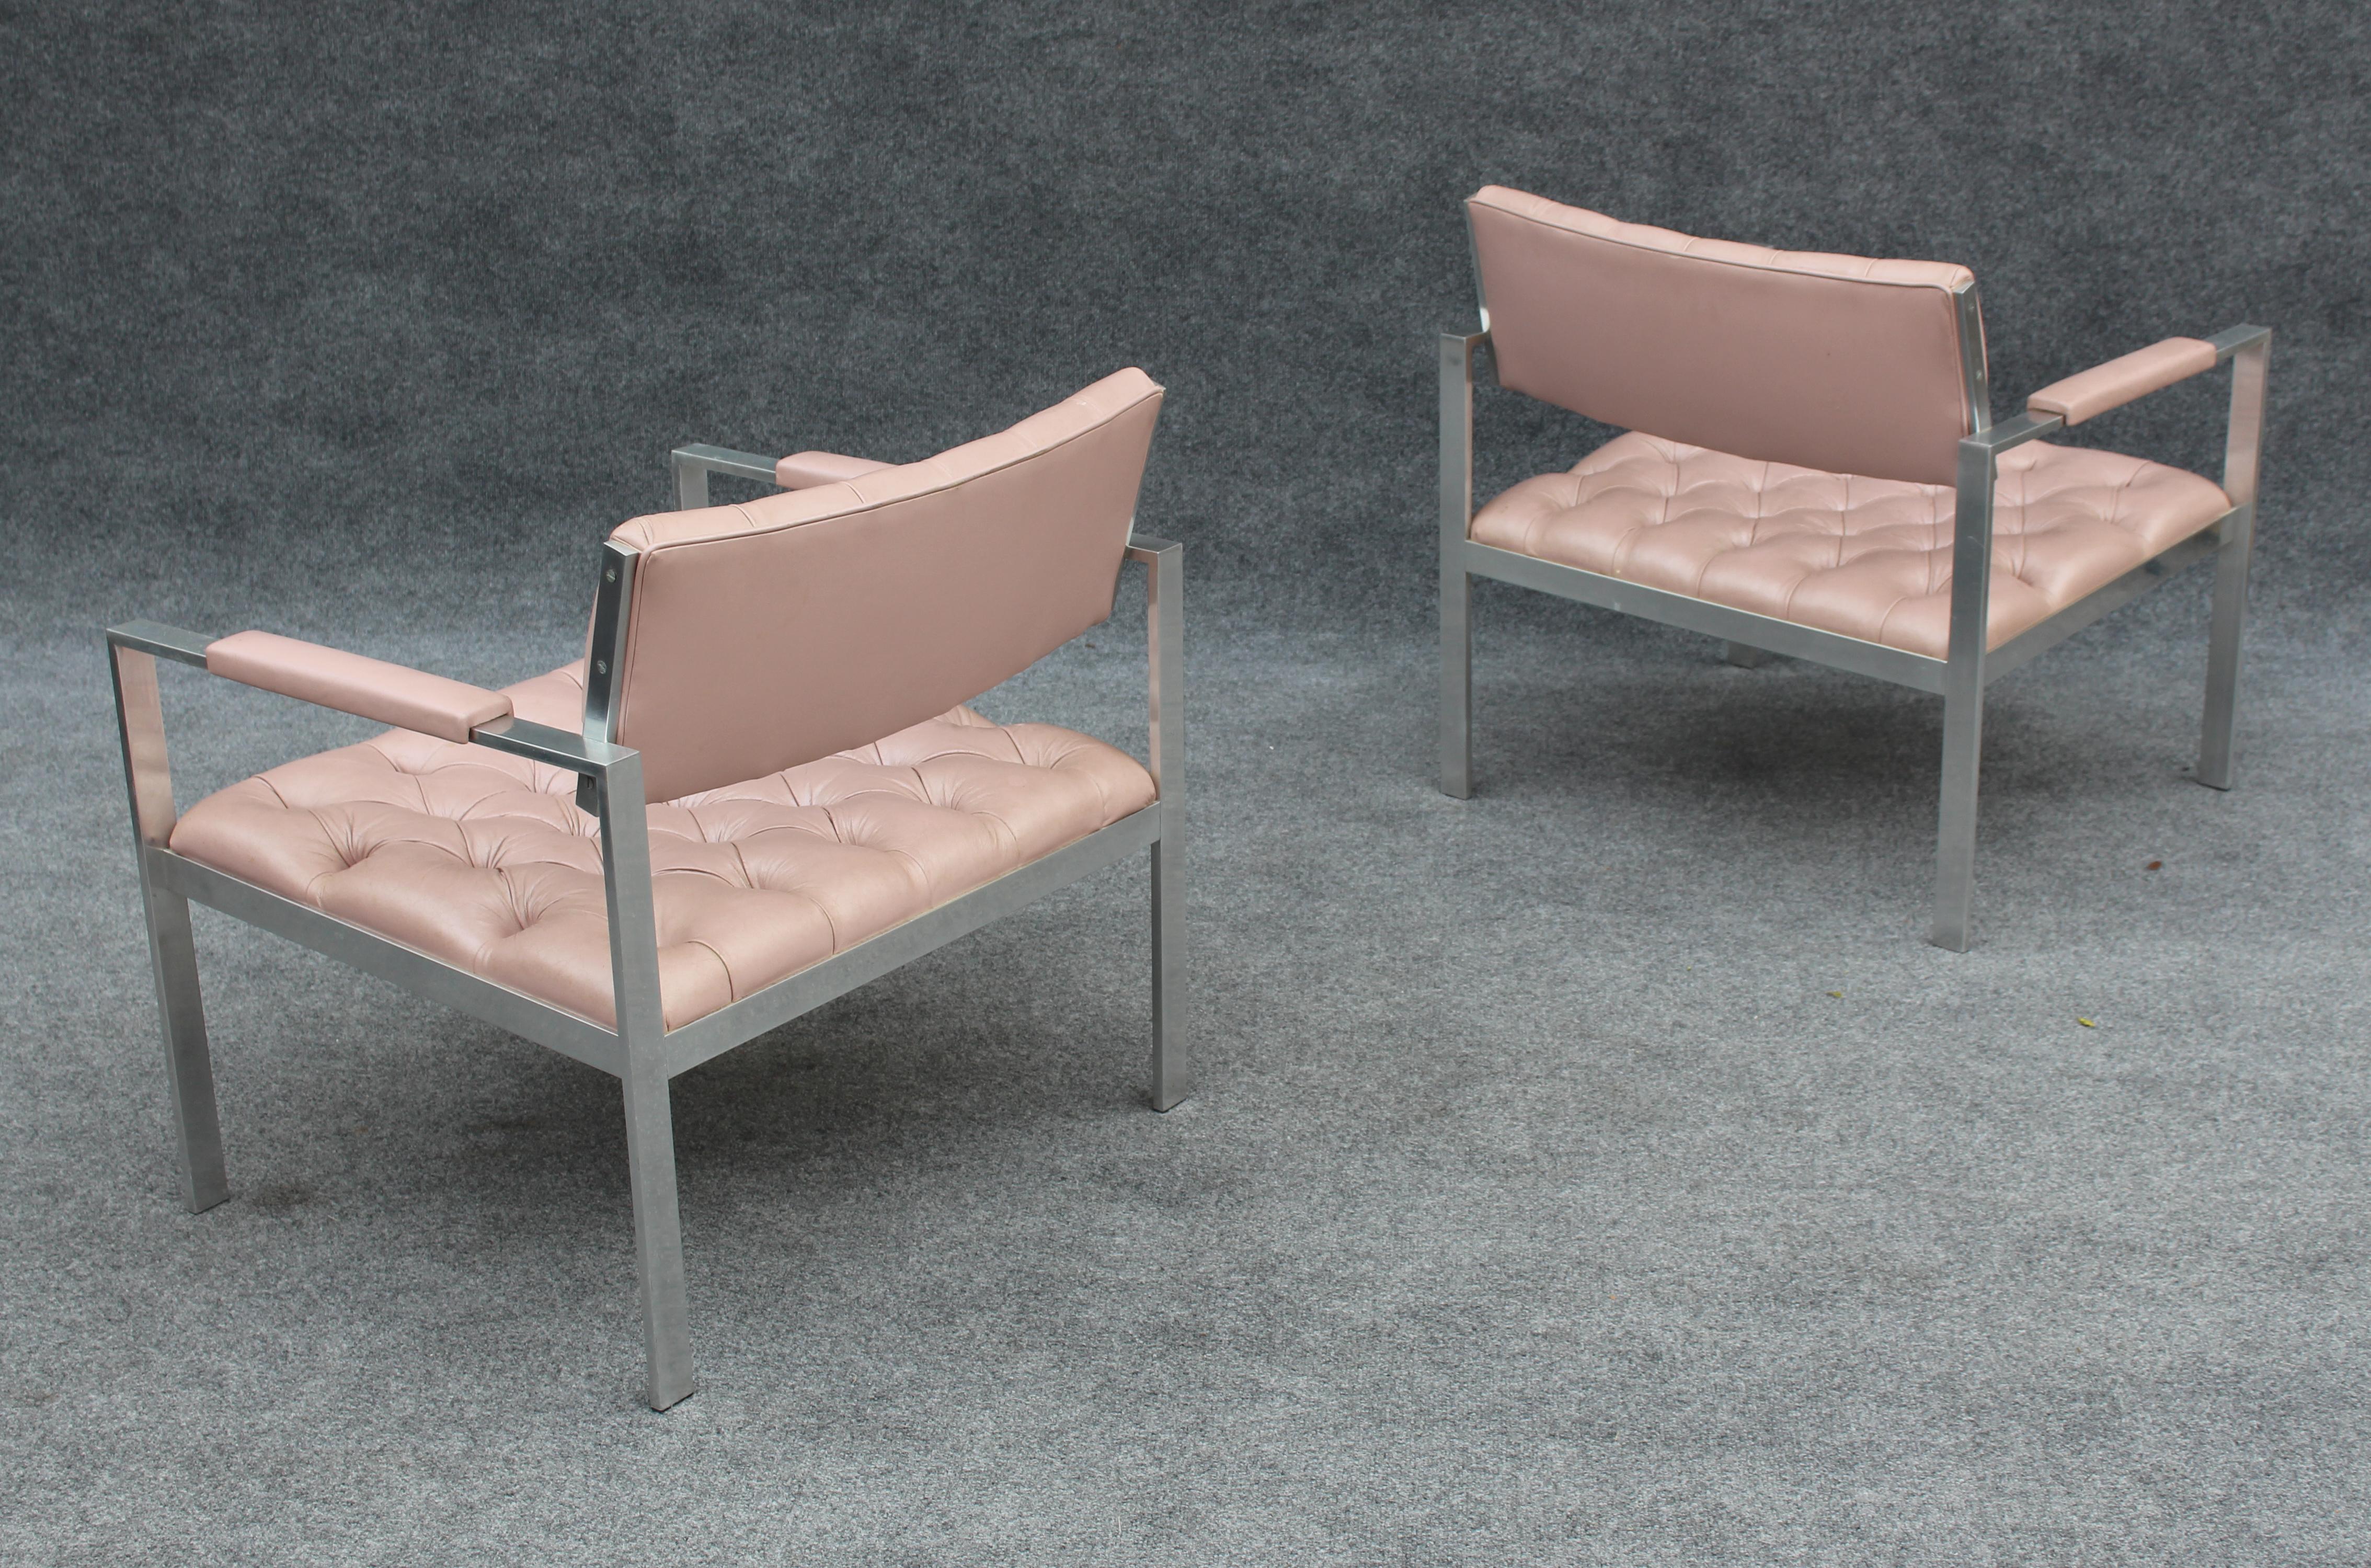 Pair of Rare Harvey Probber Polished Aluminum & Pink Leather Lounge Chairs 1970s For Sale 5